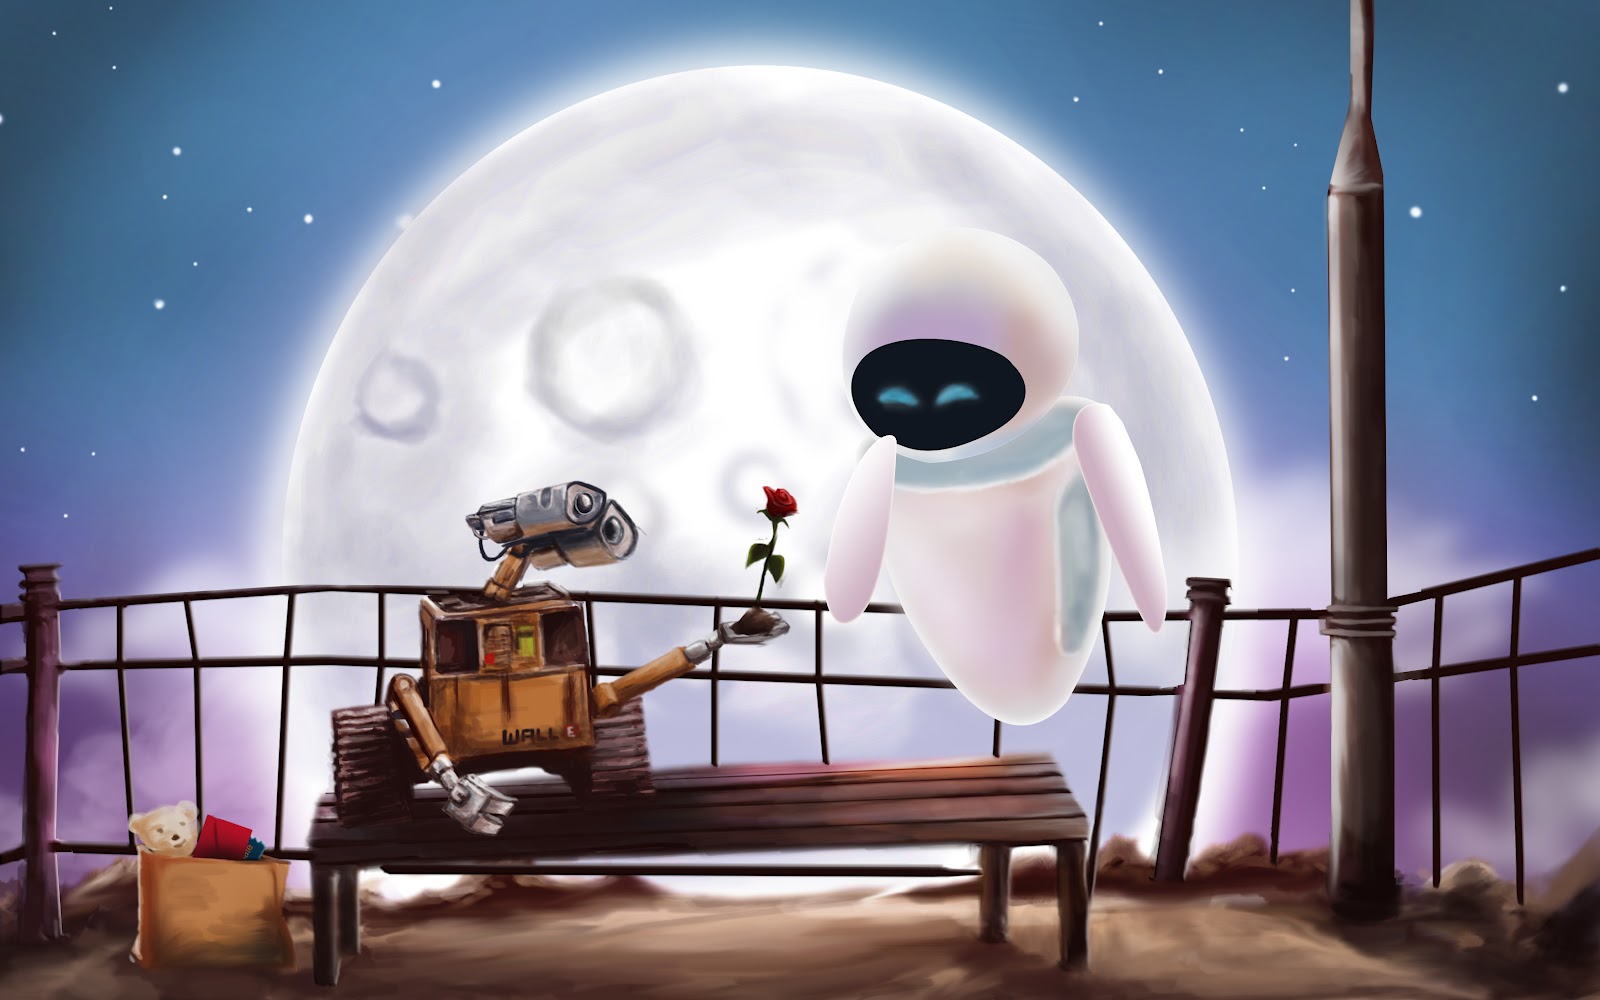 wall-e and eve’s happy ending